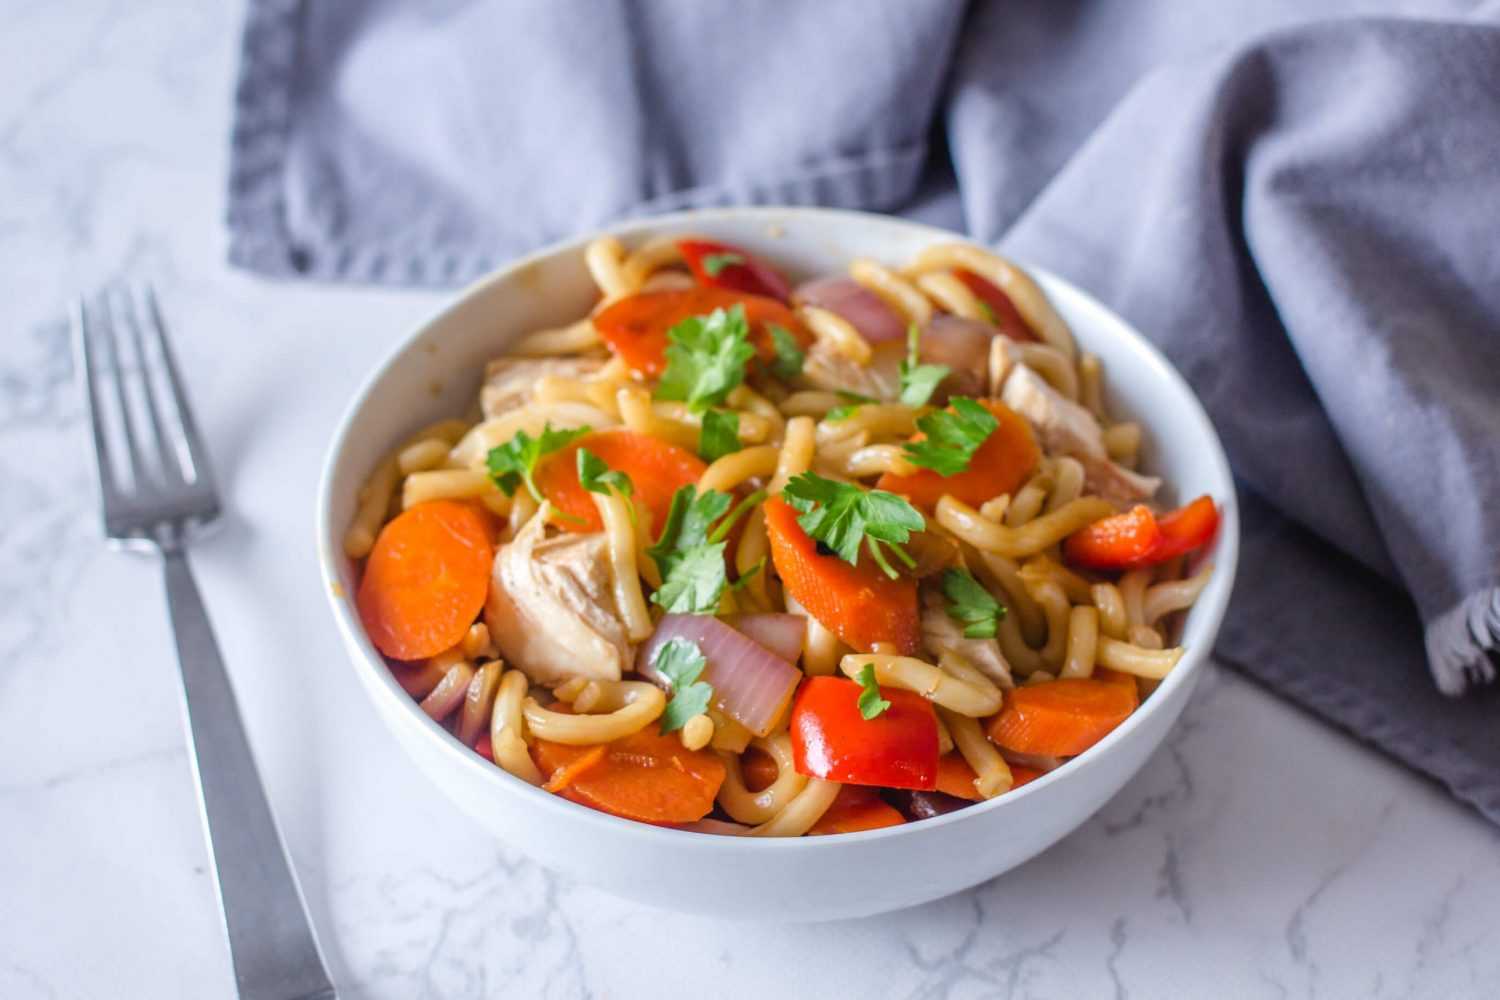 Udon noodles with carrot, red bell pepper, chicken and onion topped with chopped parsley in white bowl